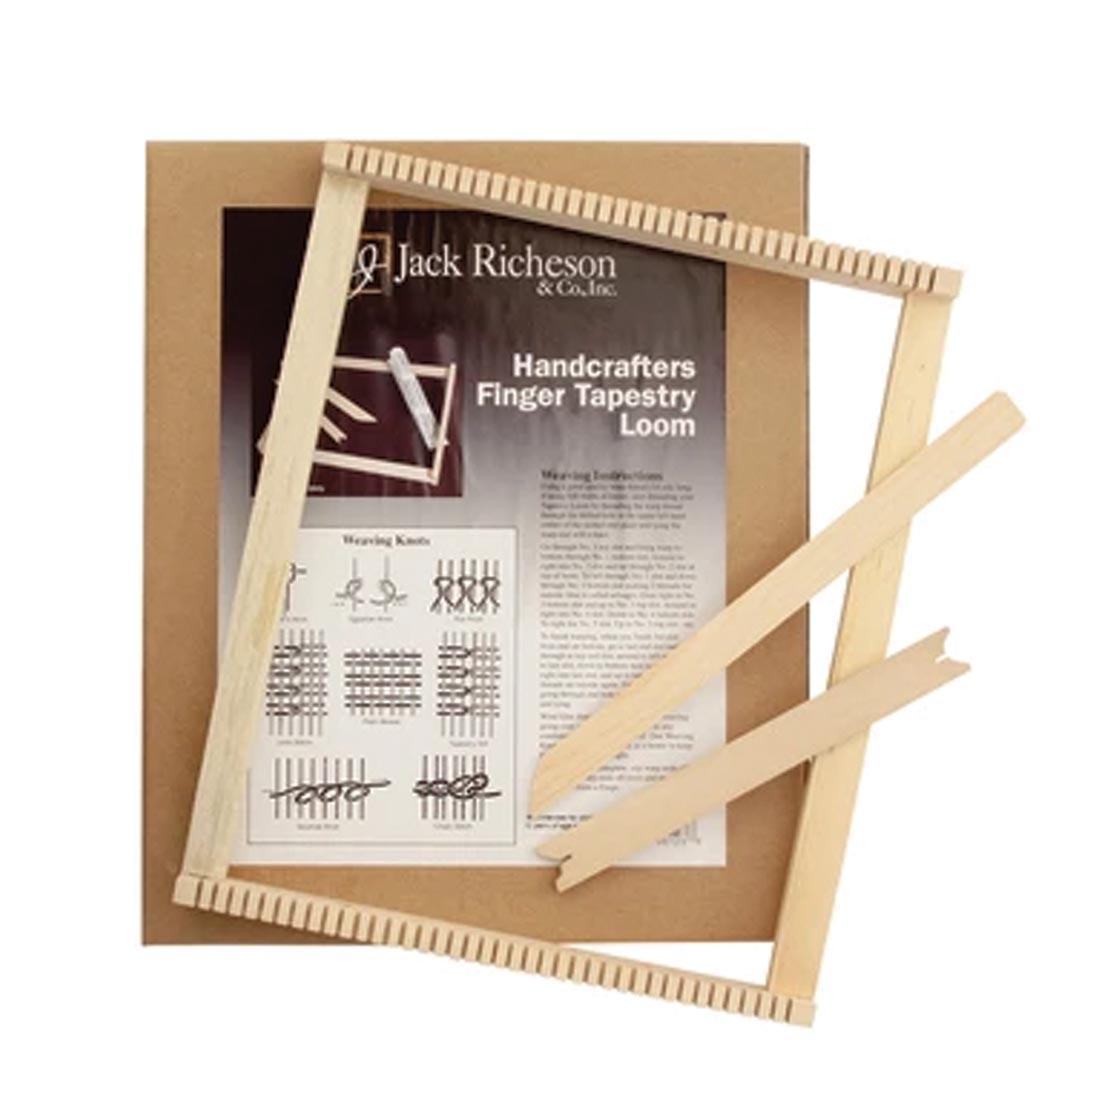 Richeson Handcrafters Finger Tapestry Loom